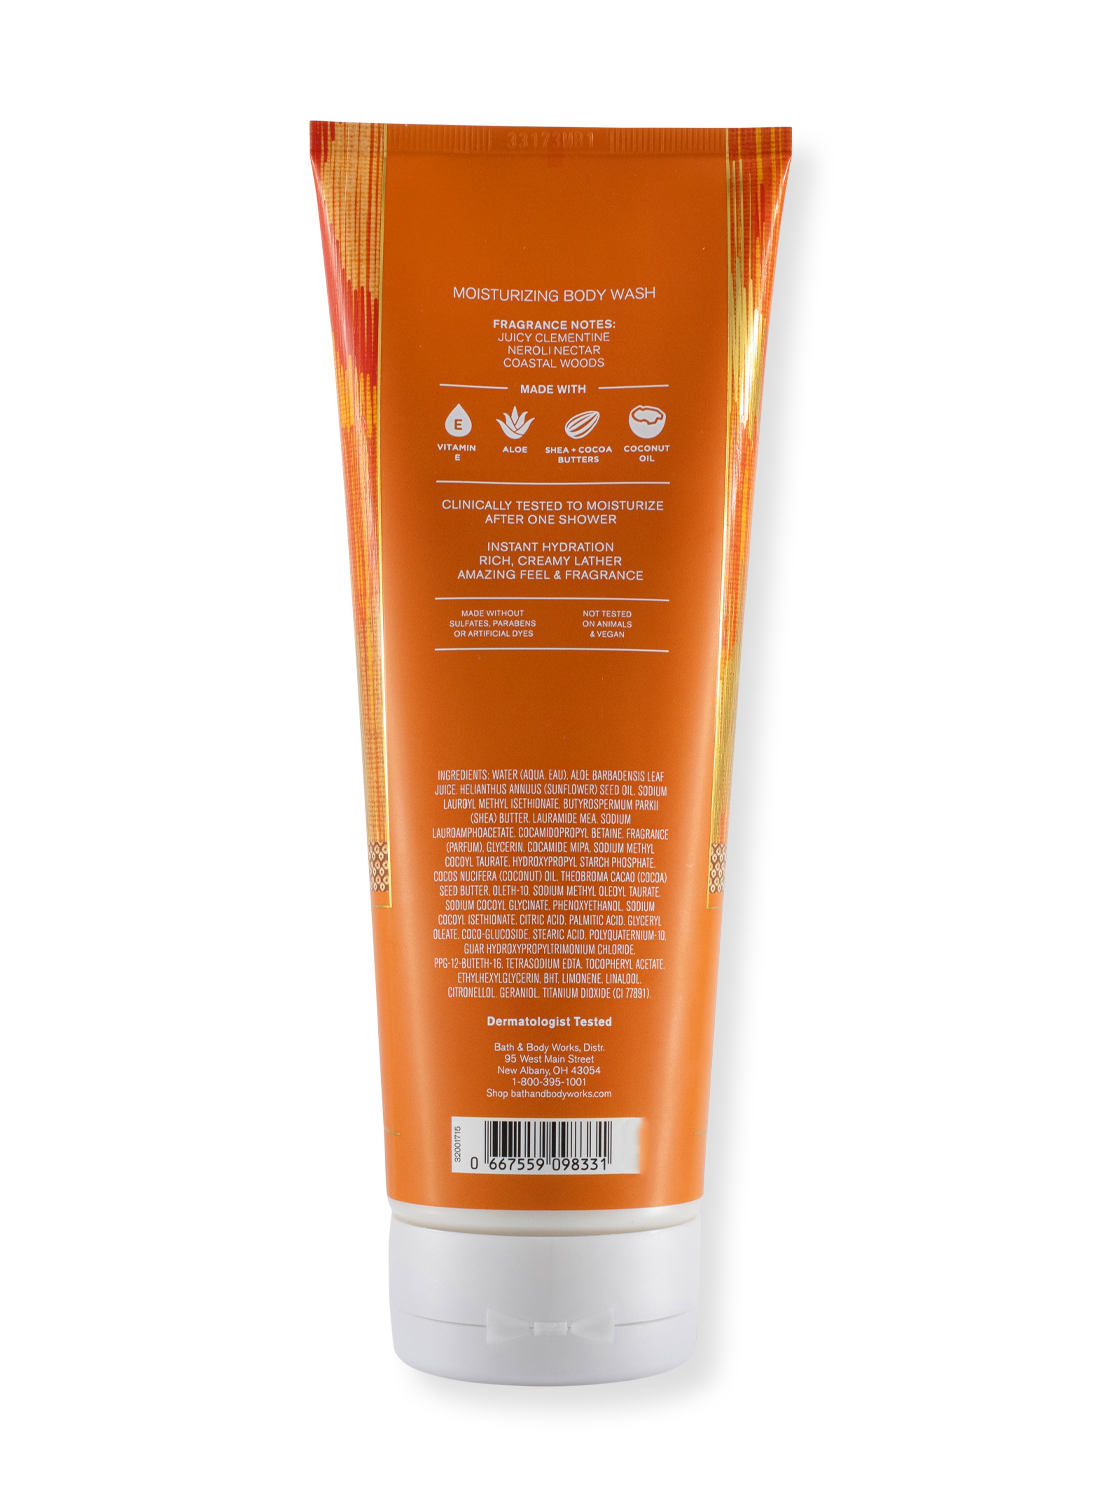 Body Wash - Calypso Clementine - Limited Edition - 295ml